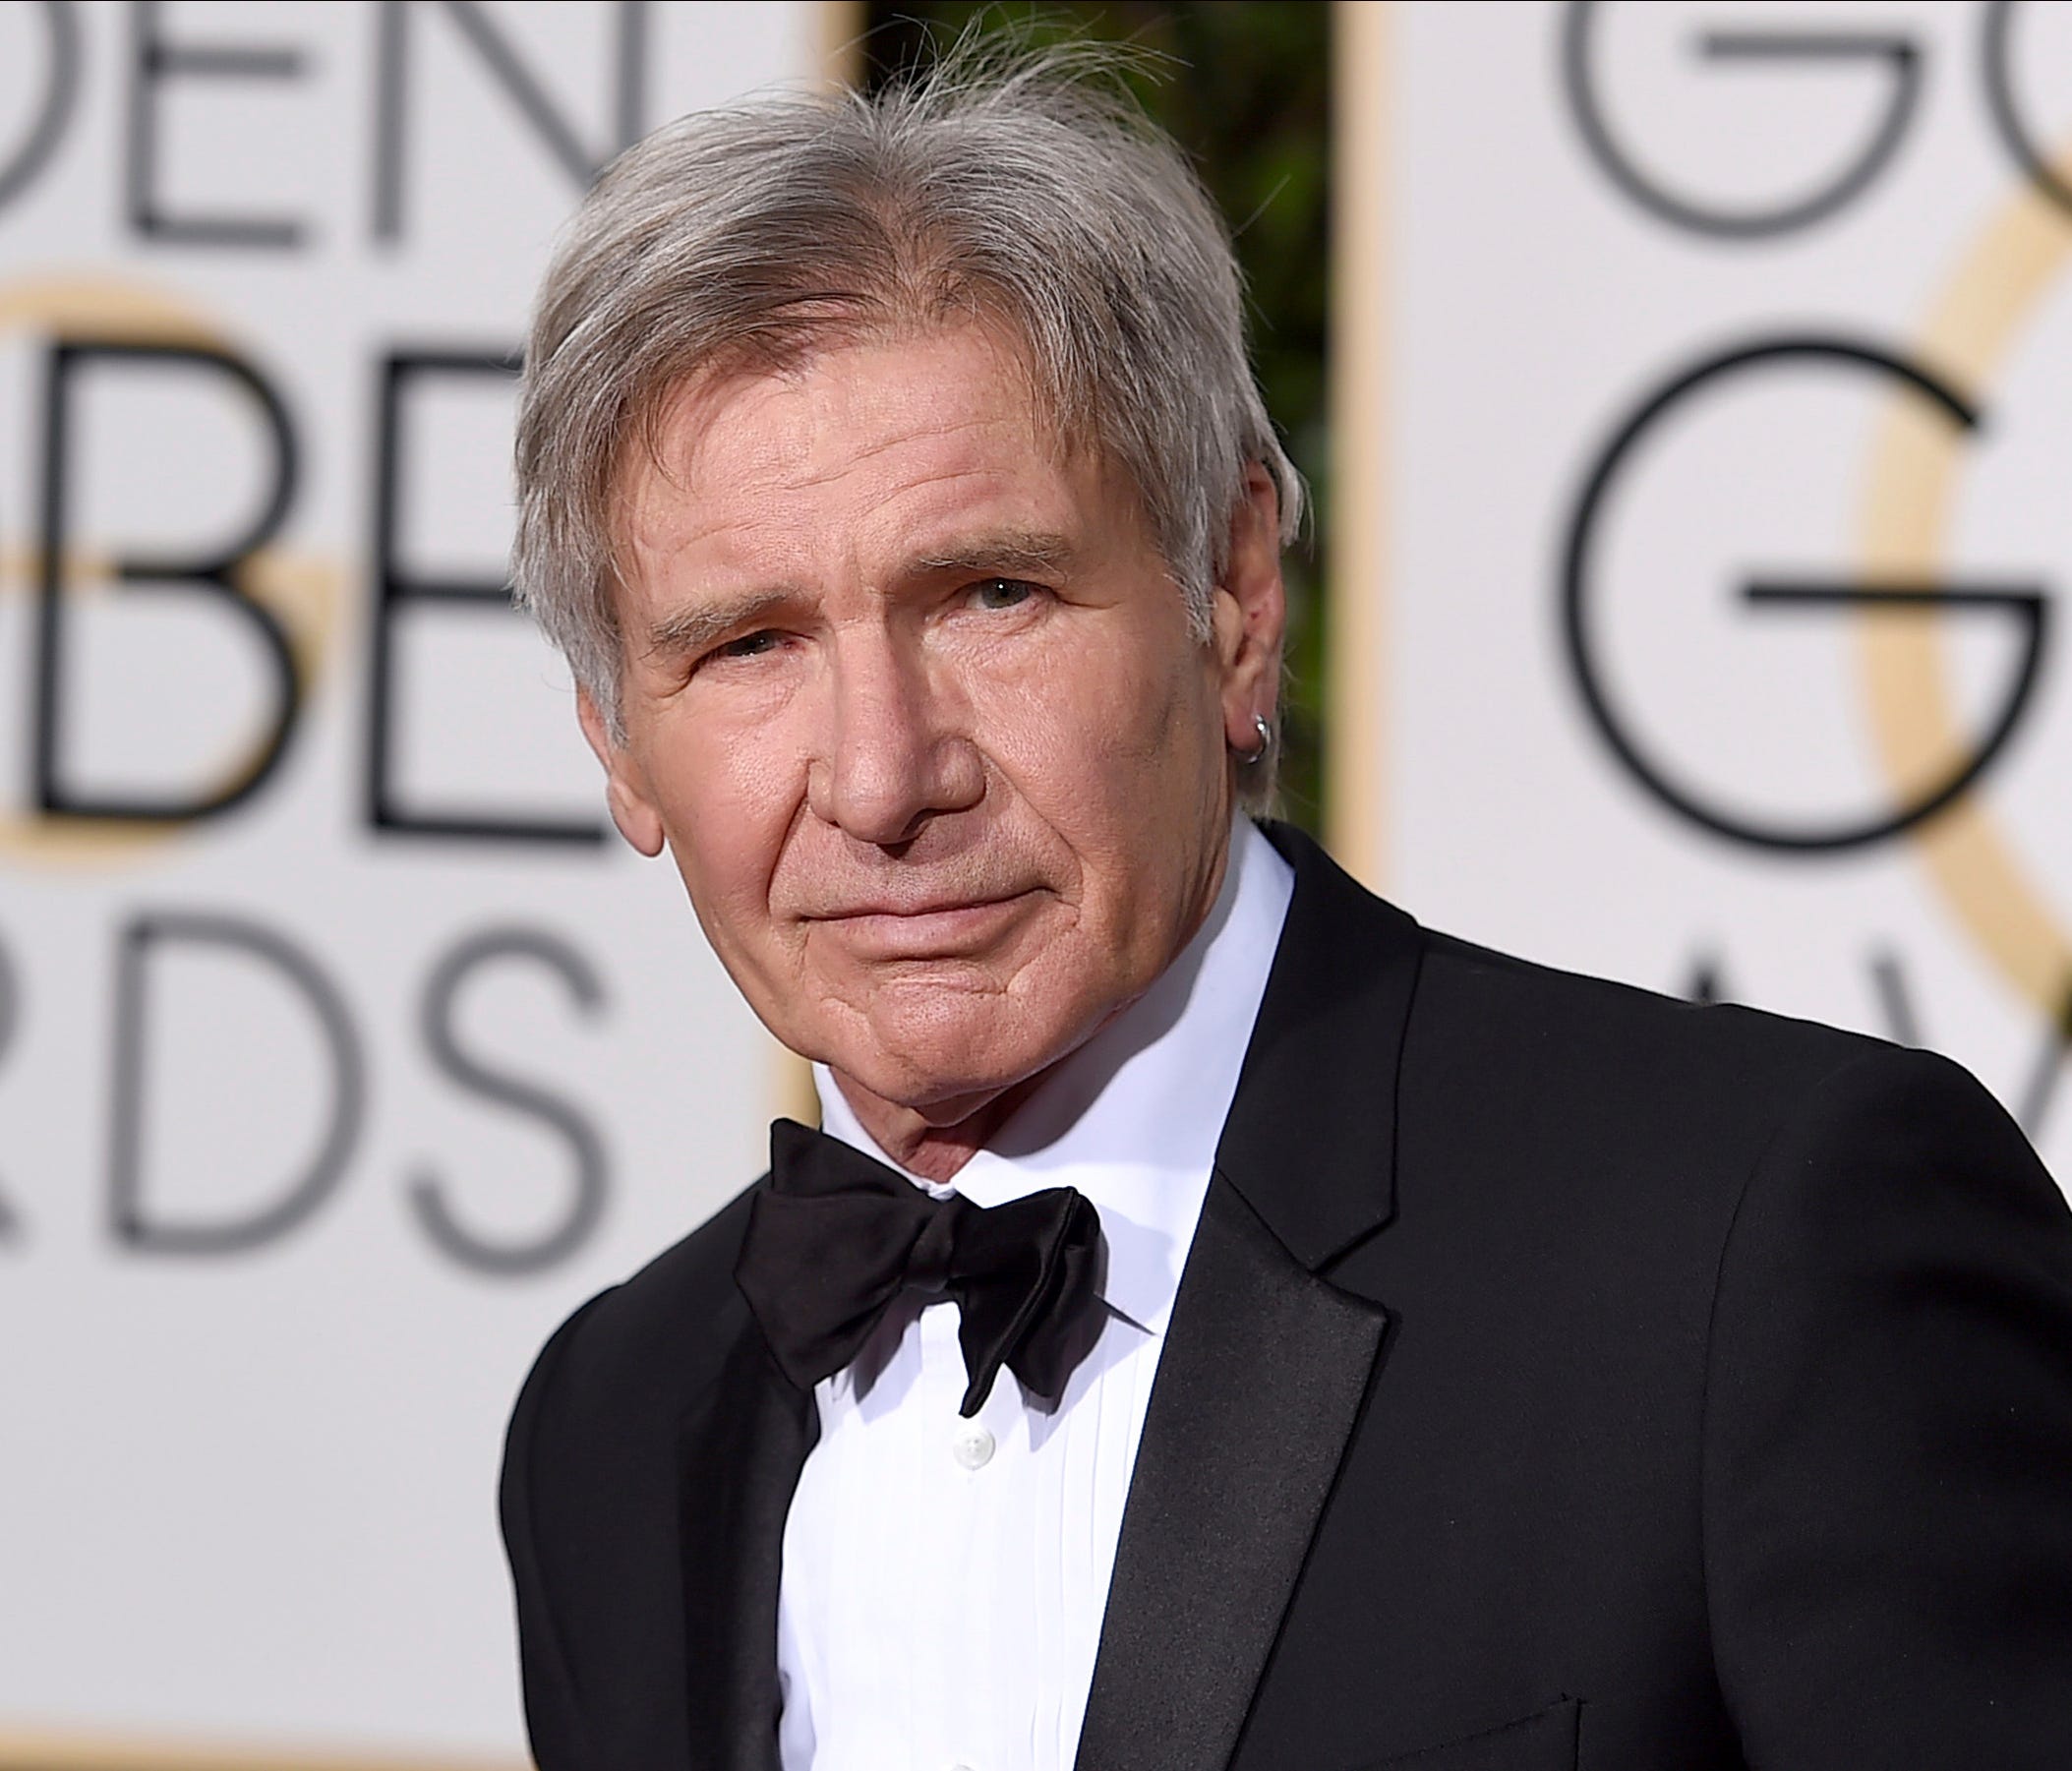 Harrison Ford is pictured arriving at the 73rd annual Golden Globe Awards in Beverly Hills, Calif. Newly released video showed a plane piloted by Ford mistakenly flying low over an airliner that was taxiing at a Southern California airport.